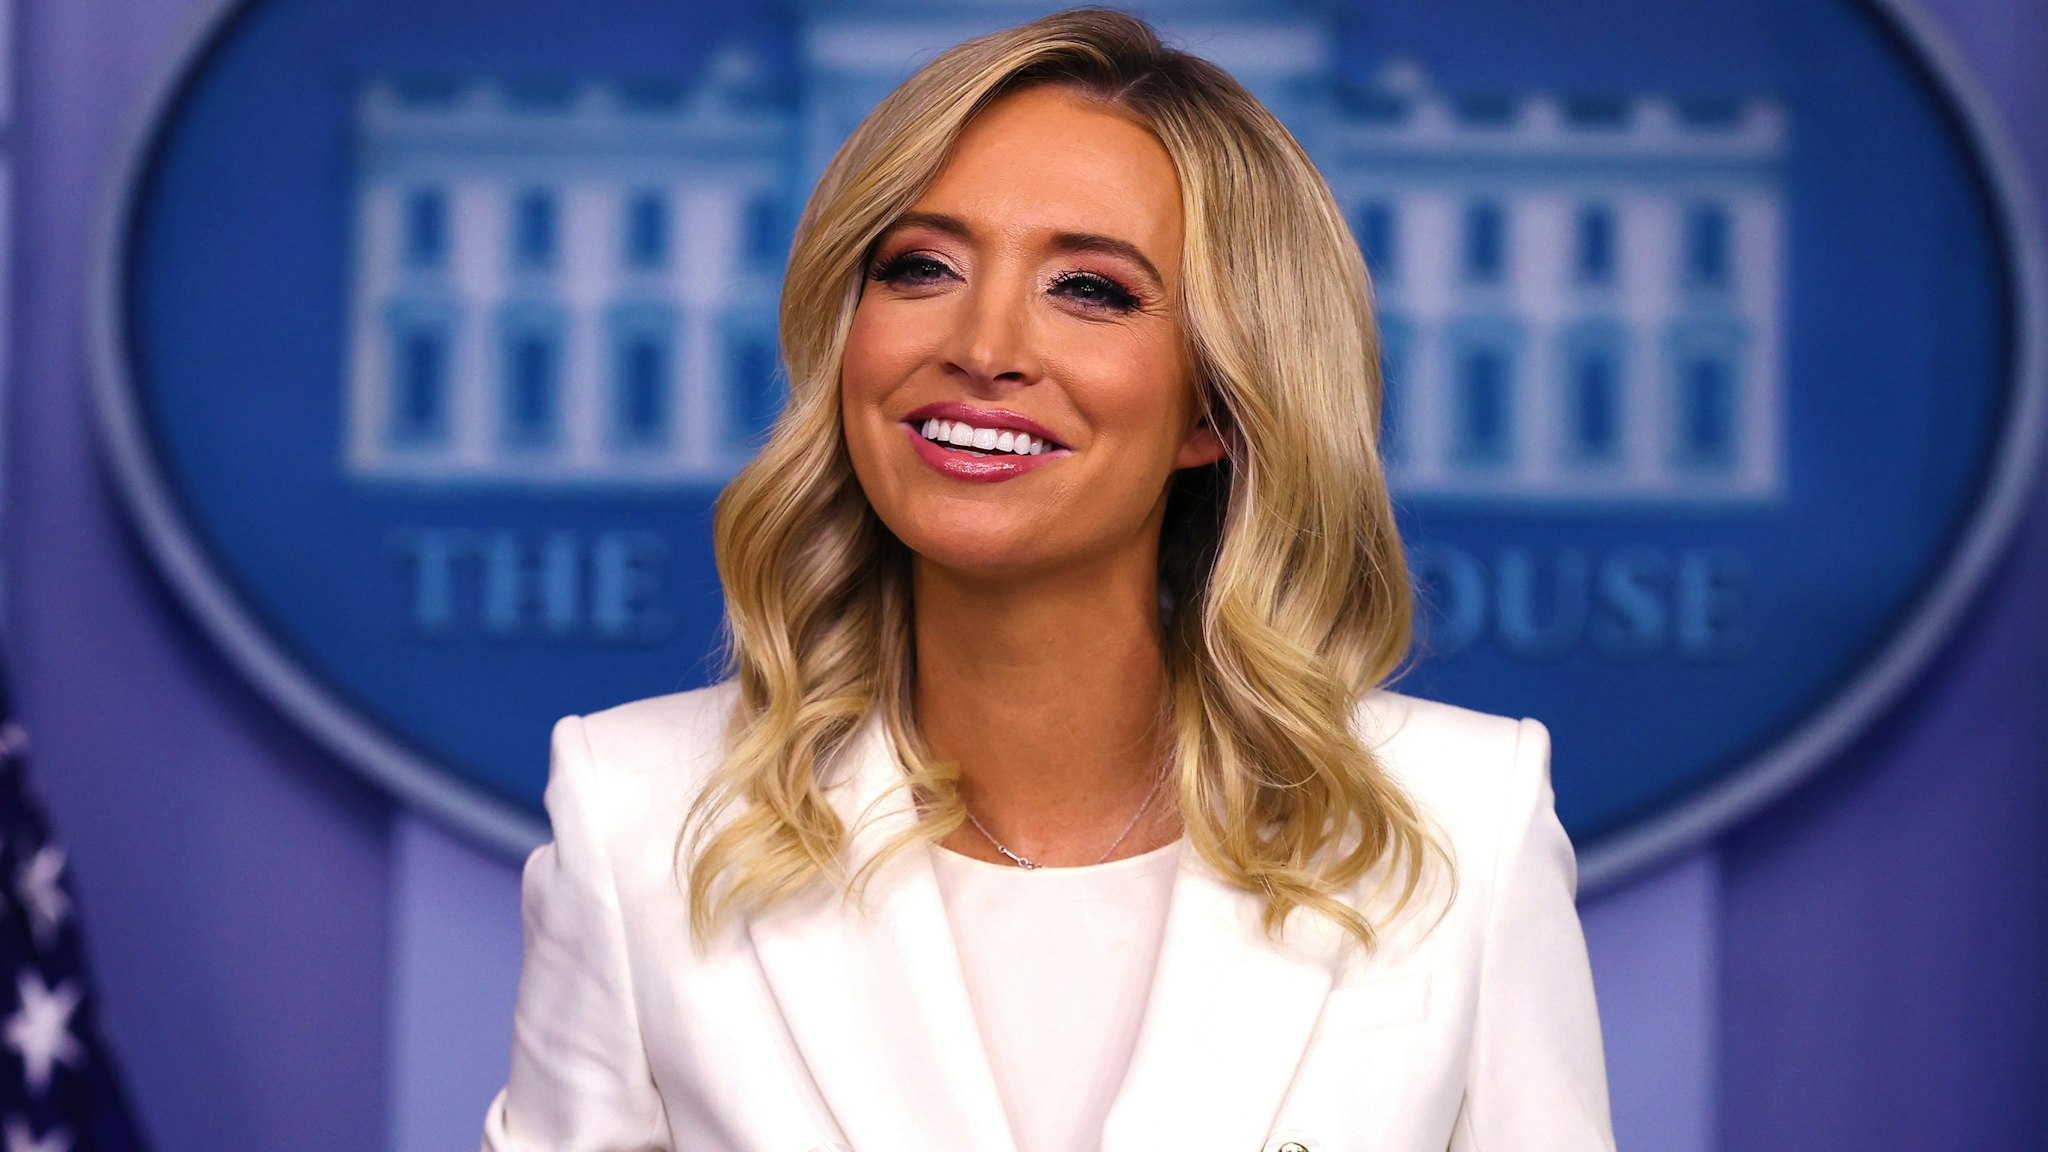 WASHINGTON, DC - MAY 06: White House Press Secretary Kayleigh McEnany conducts a news conference in the Brady Press Briefing Room at the White House May 06, 2020 in Washington, DC. This is McEnany's second formal news conference since becoming President Donald Trump's press secretary last month.